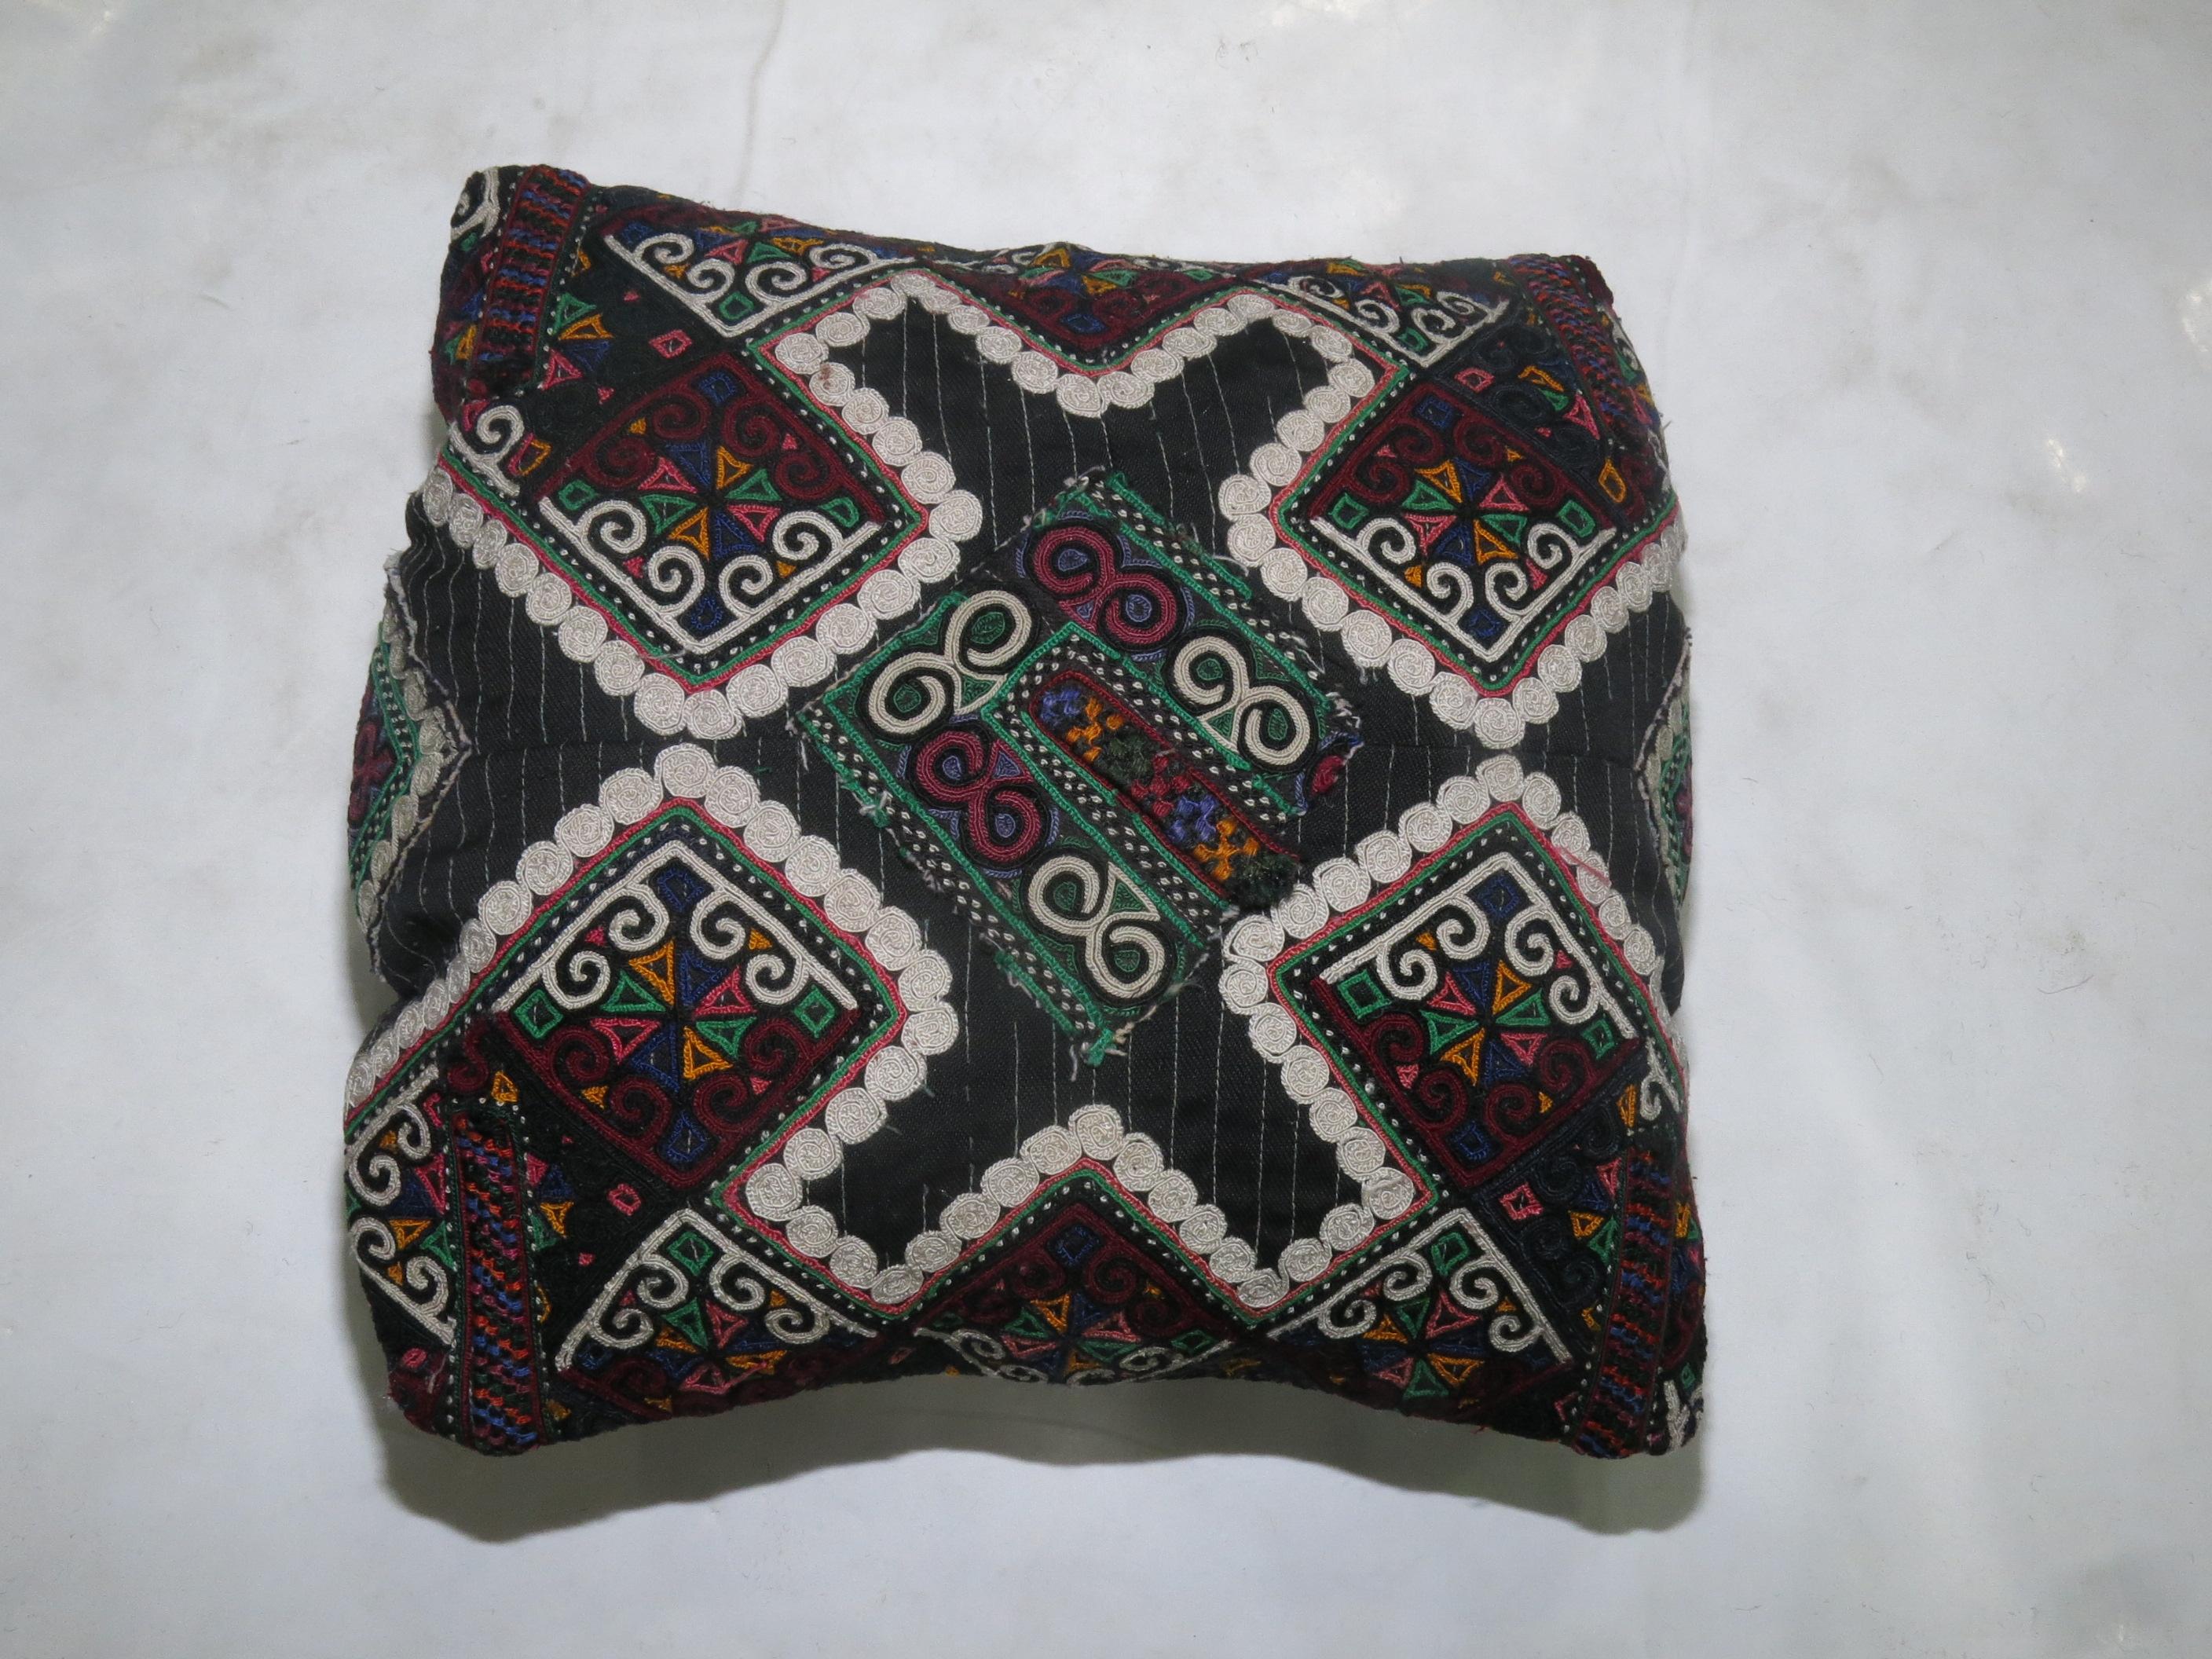 Small square size pillow made from a Russian Suzanni embroidery

Measures: 12